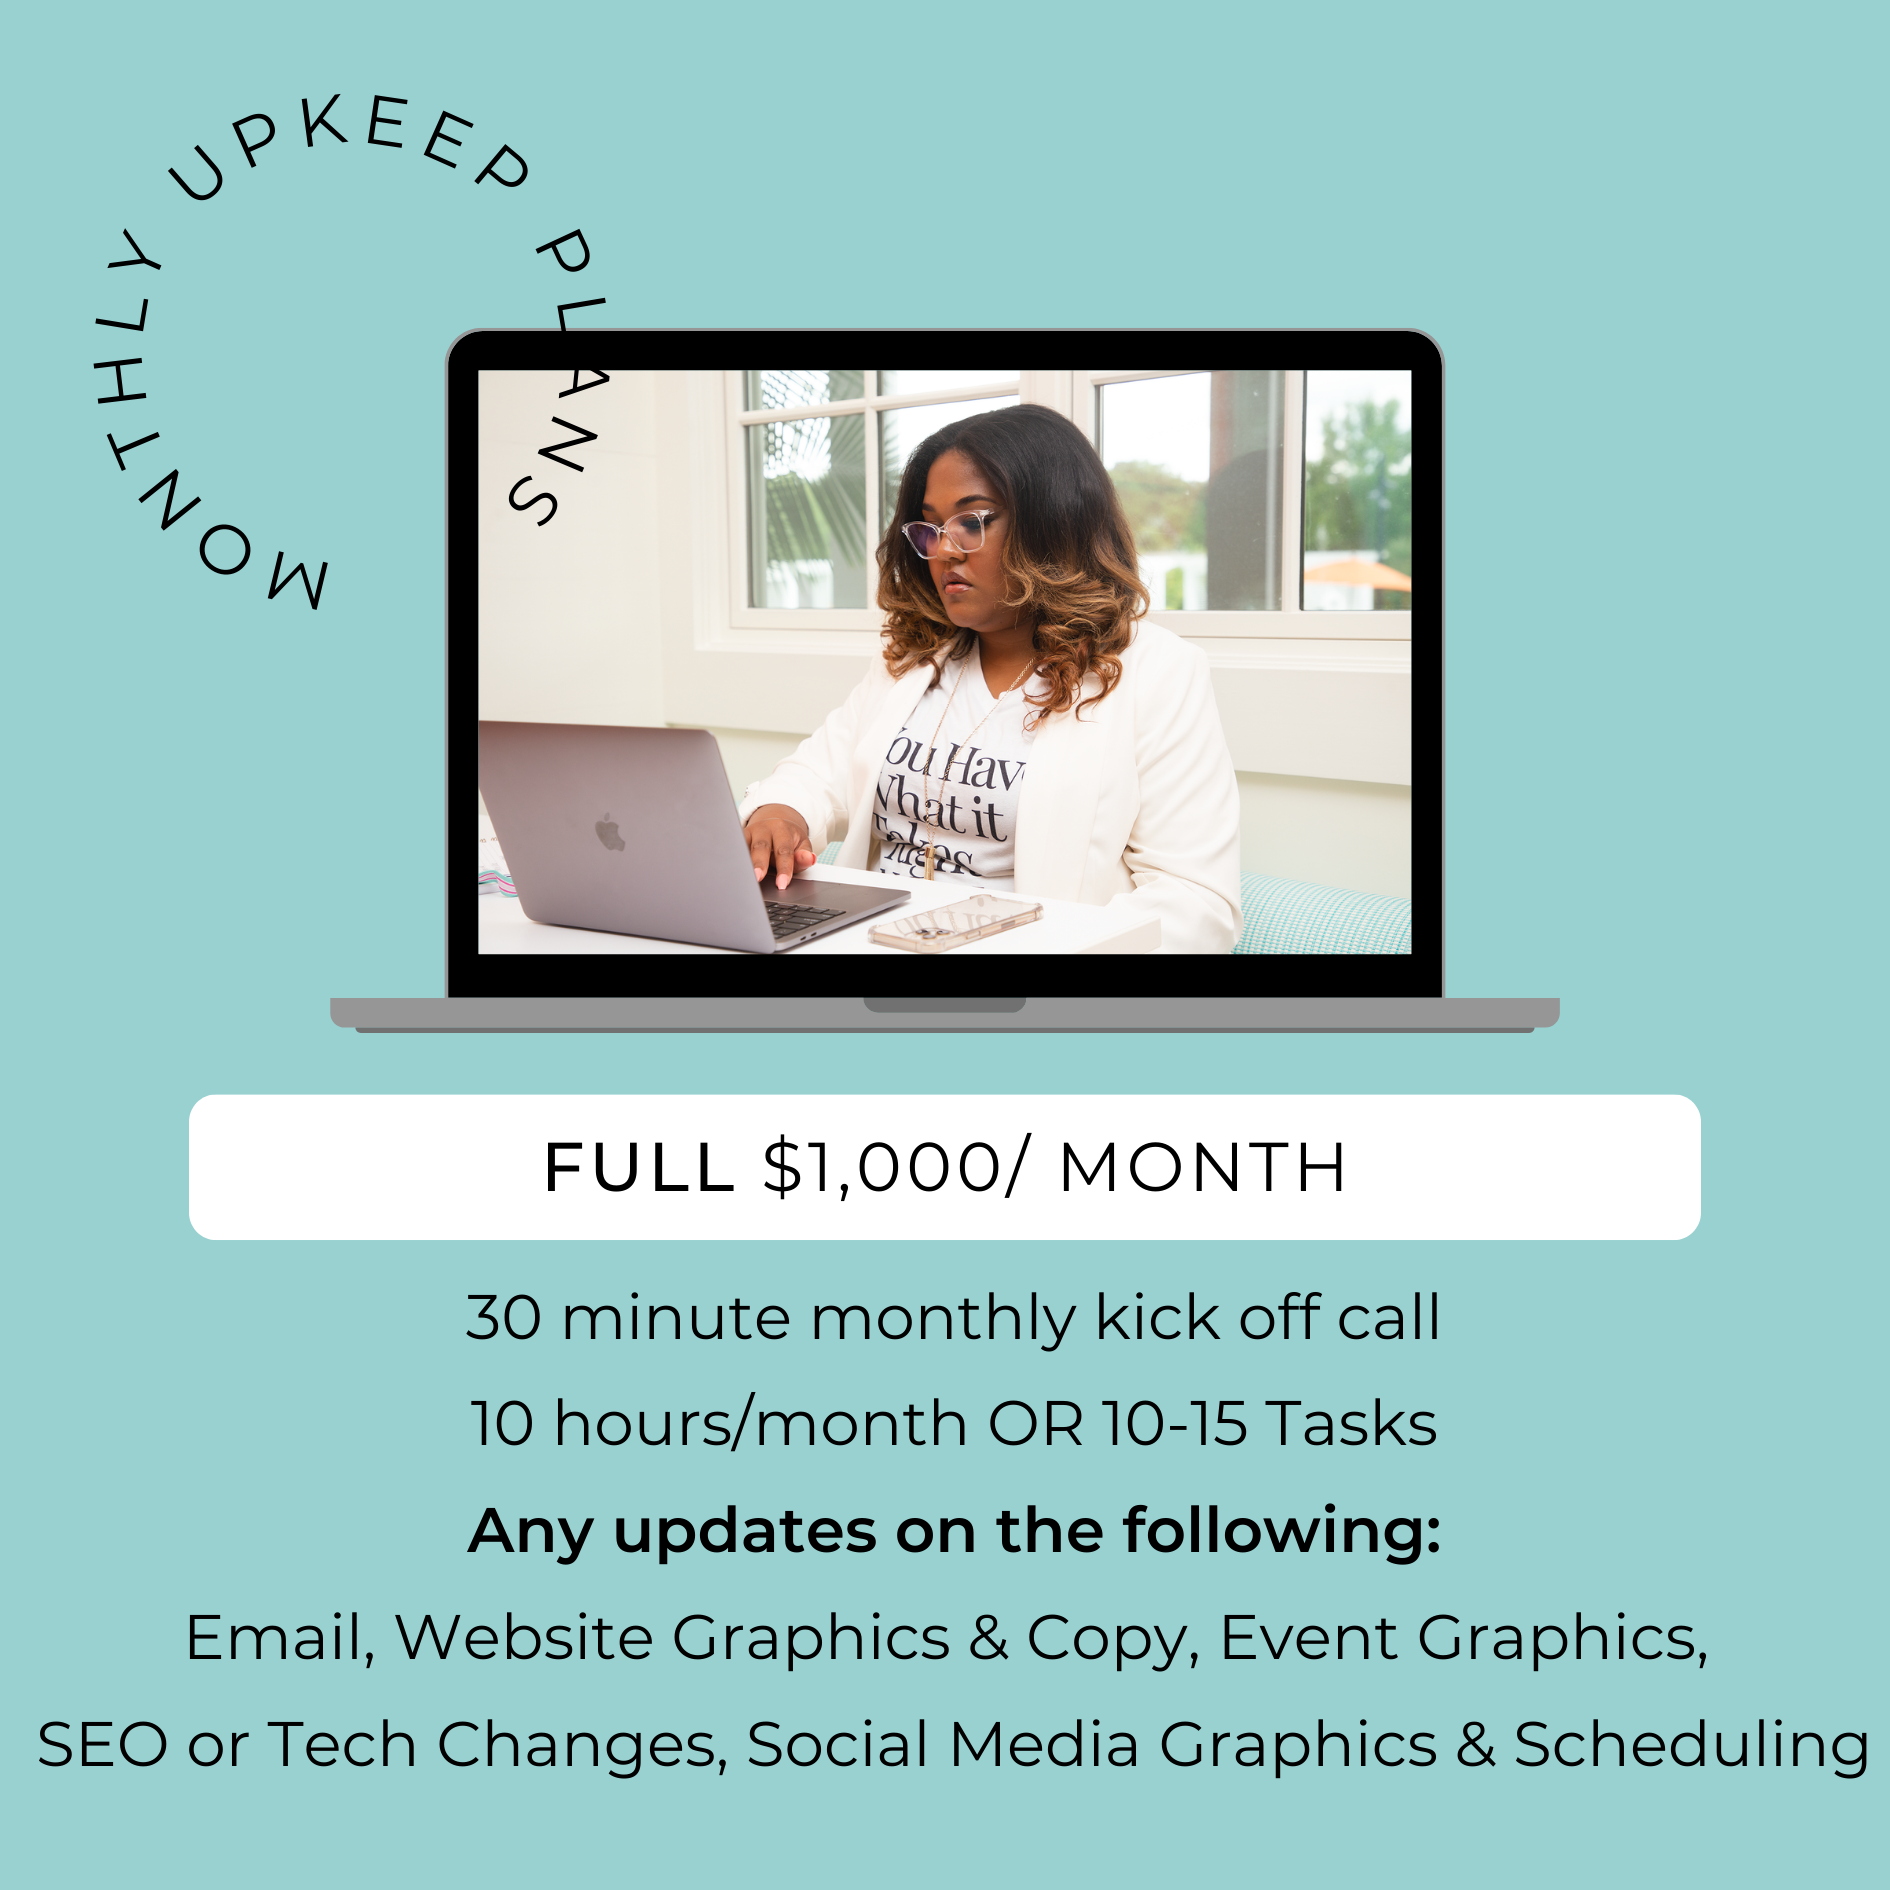 The Full Monthly upkeep plan of $1,000 per month